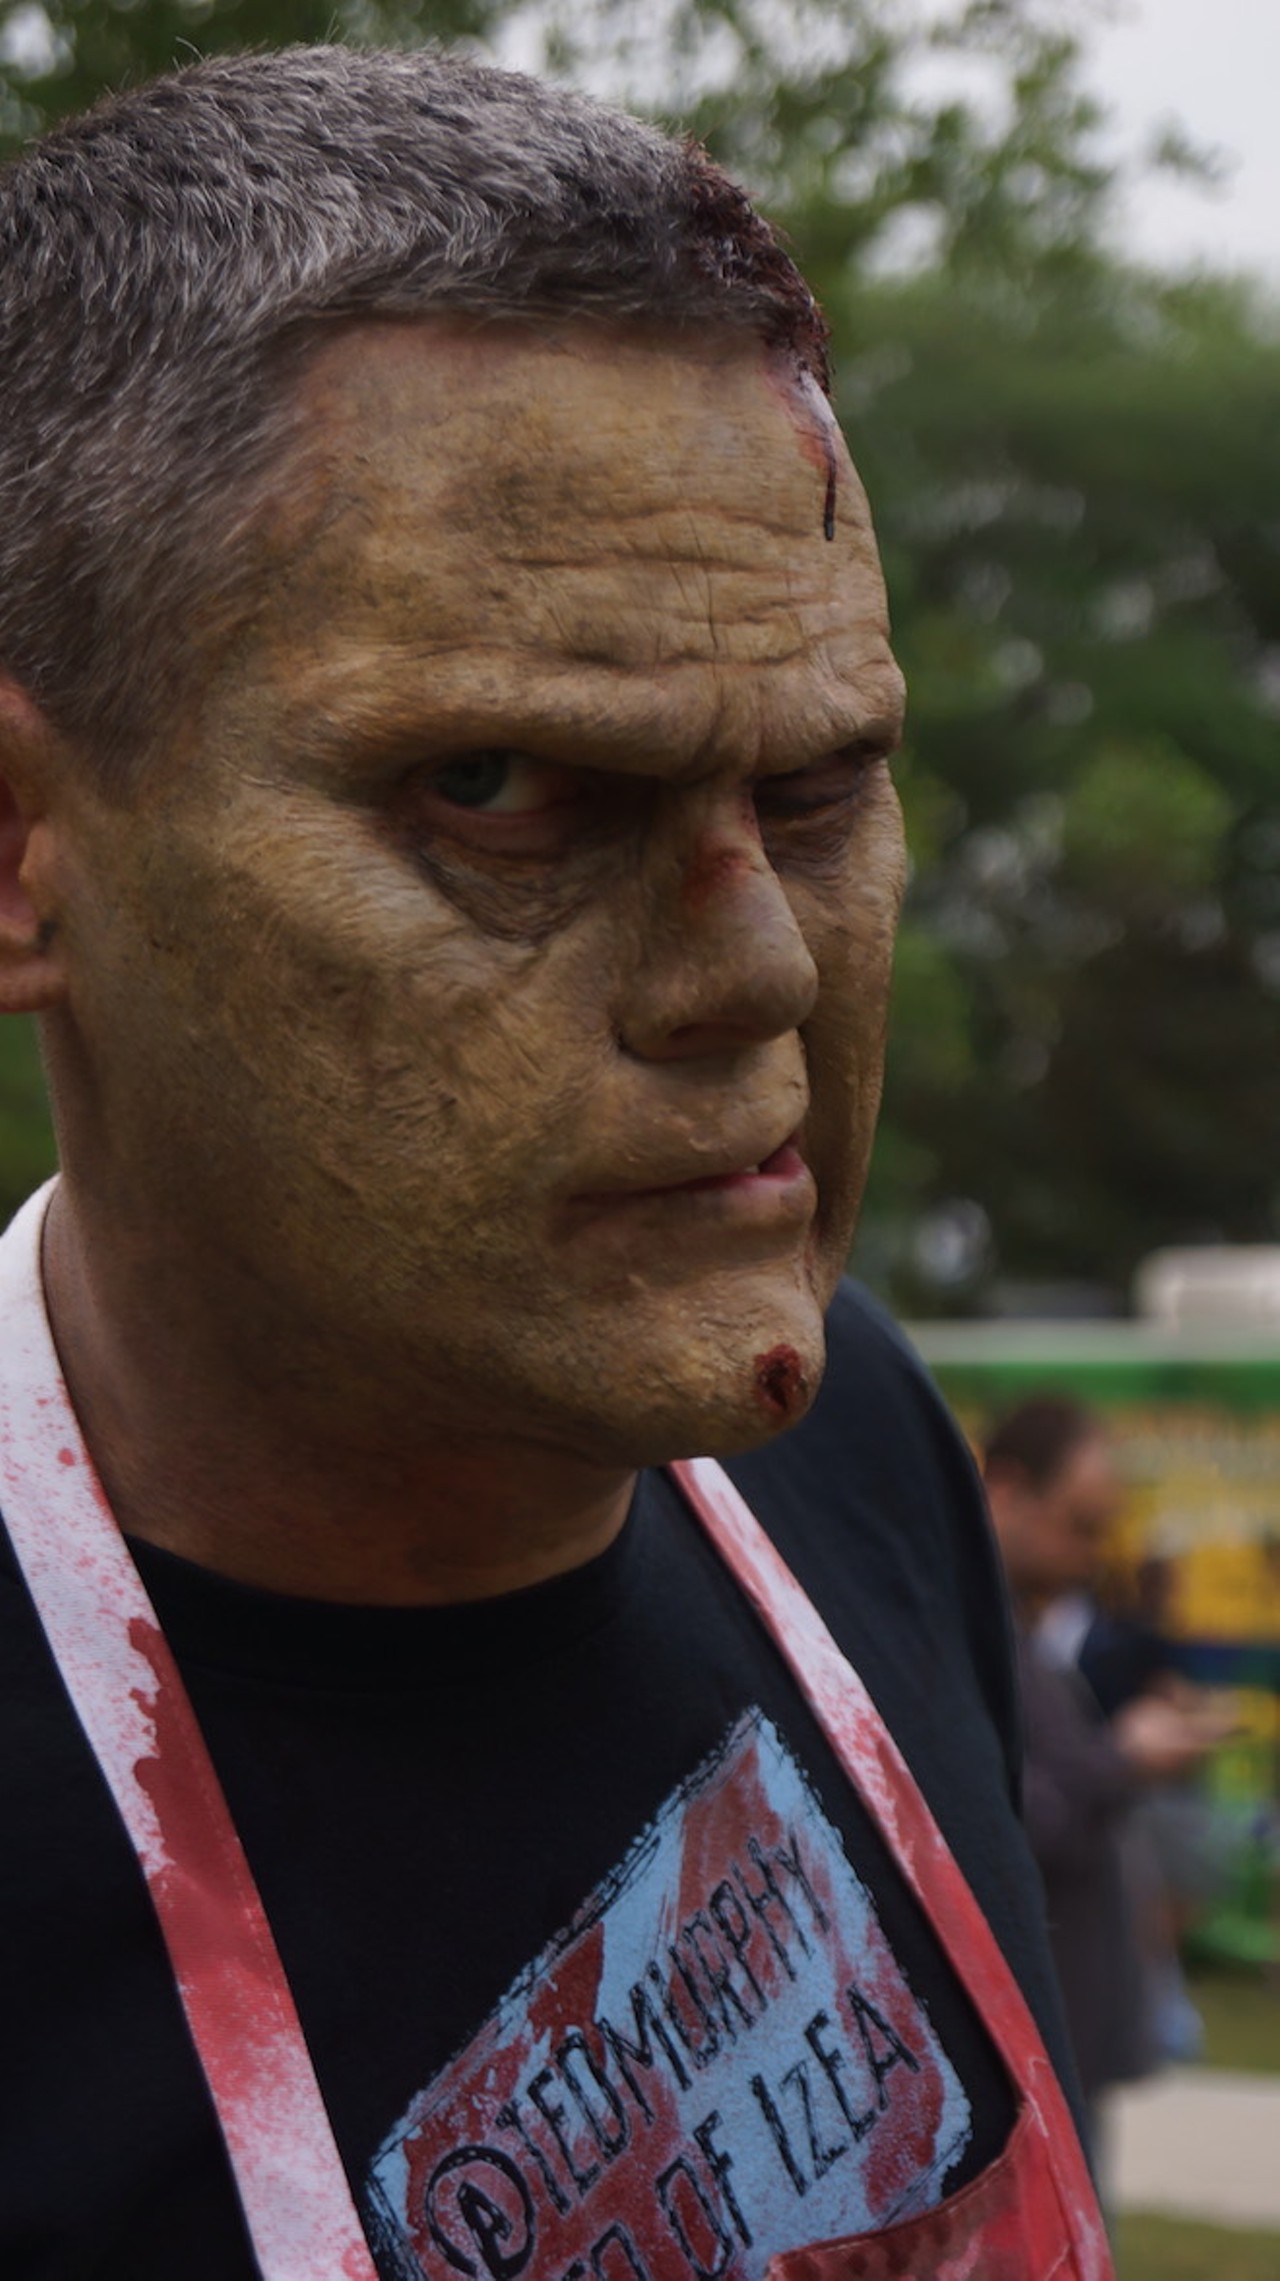 Ted, CEO of Izea, looking menacing replete in his own zombie alter ego getup.